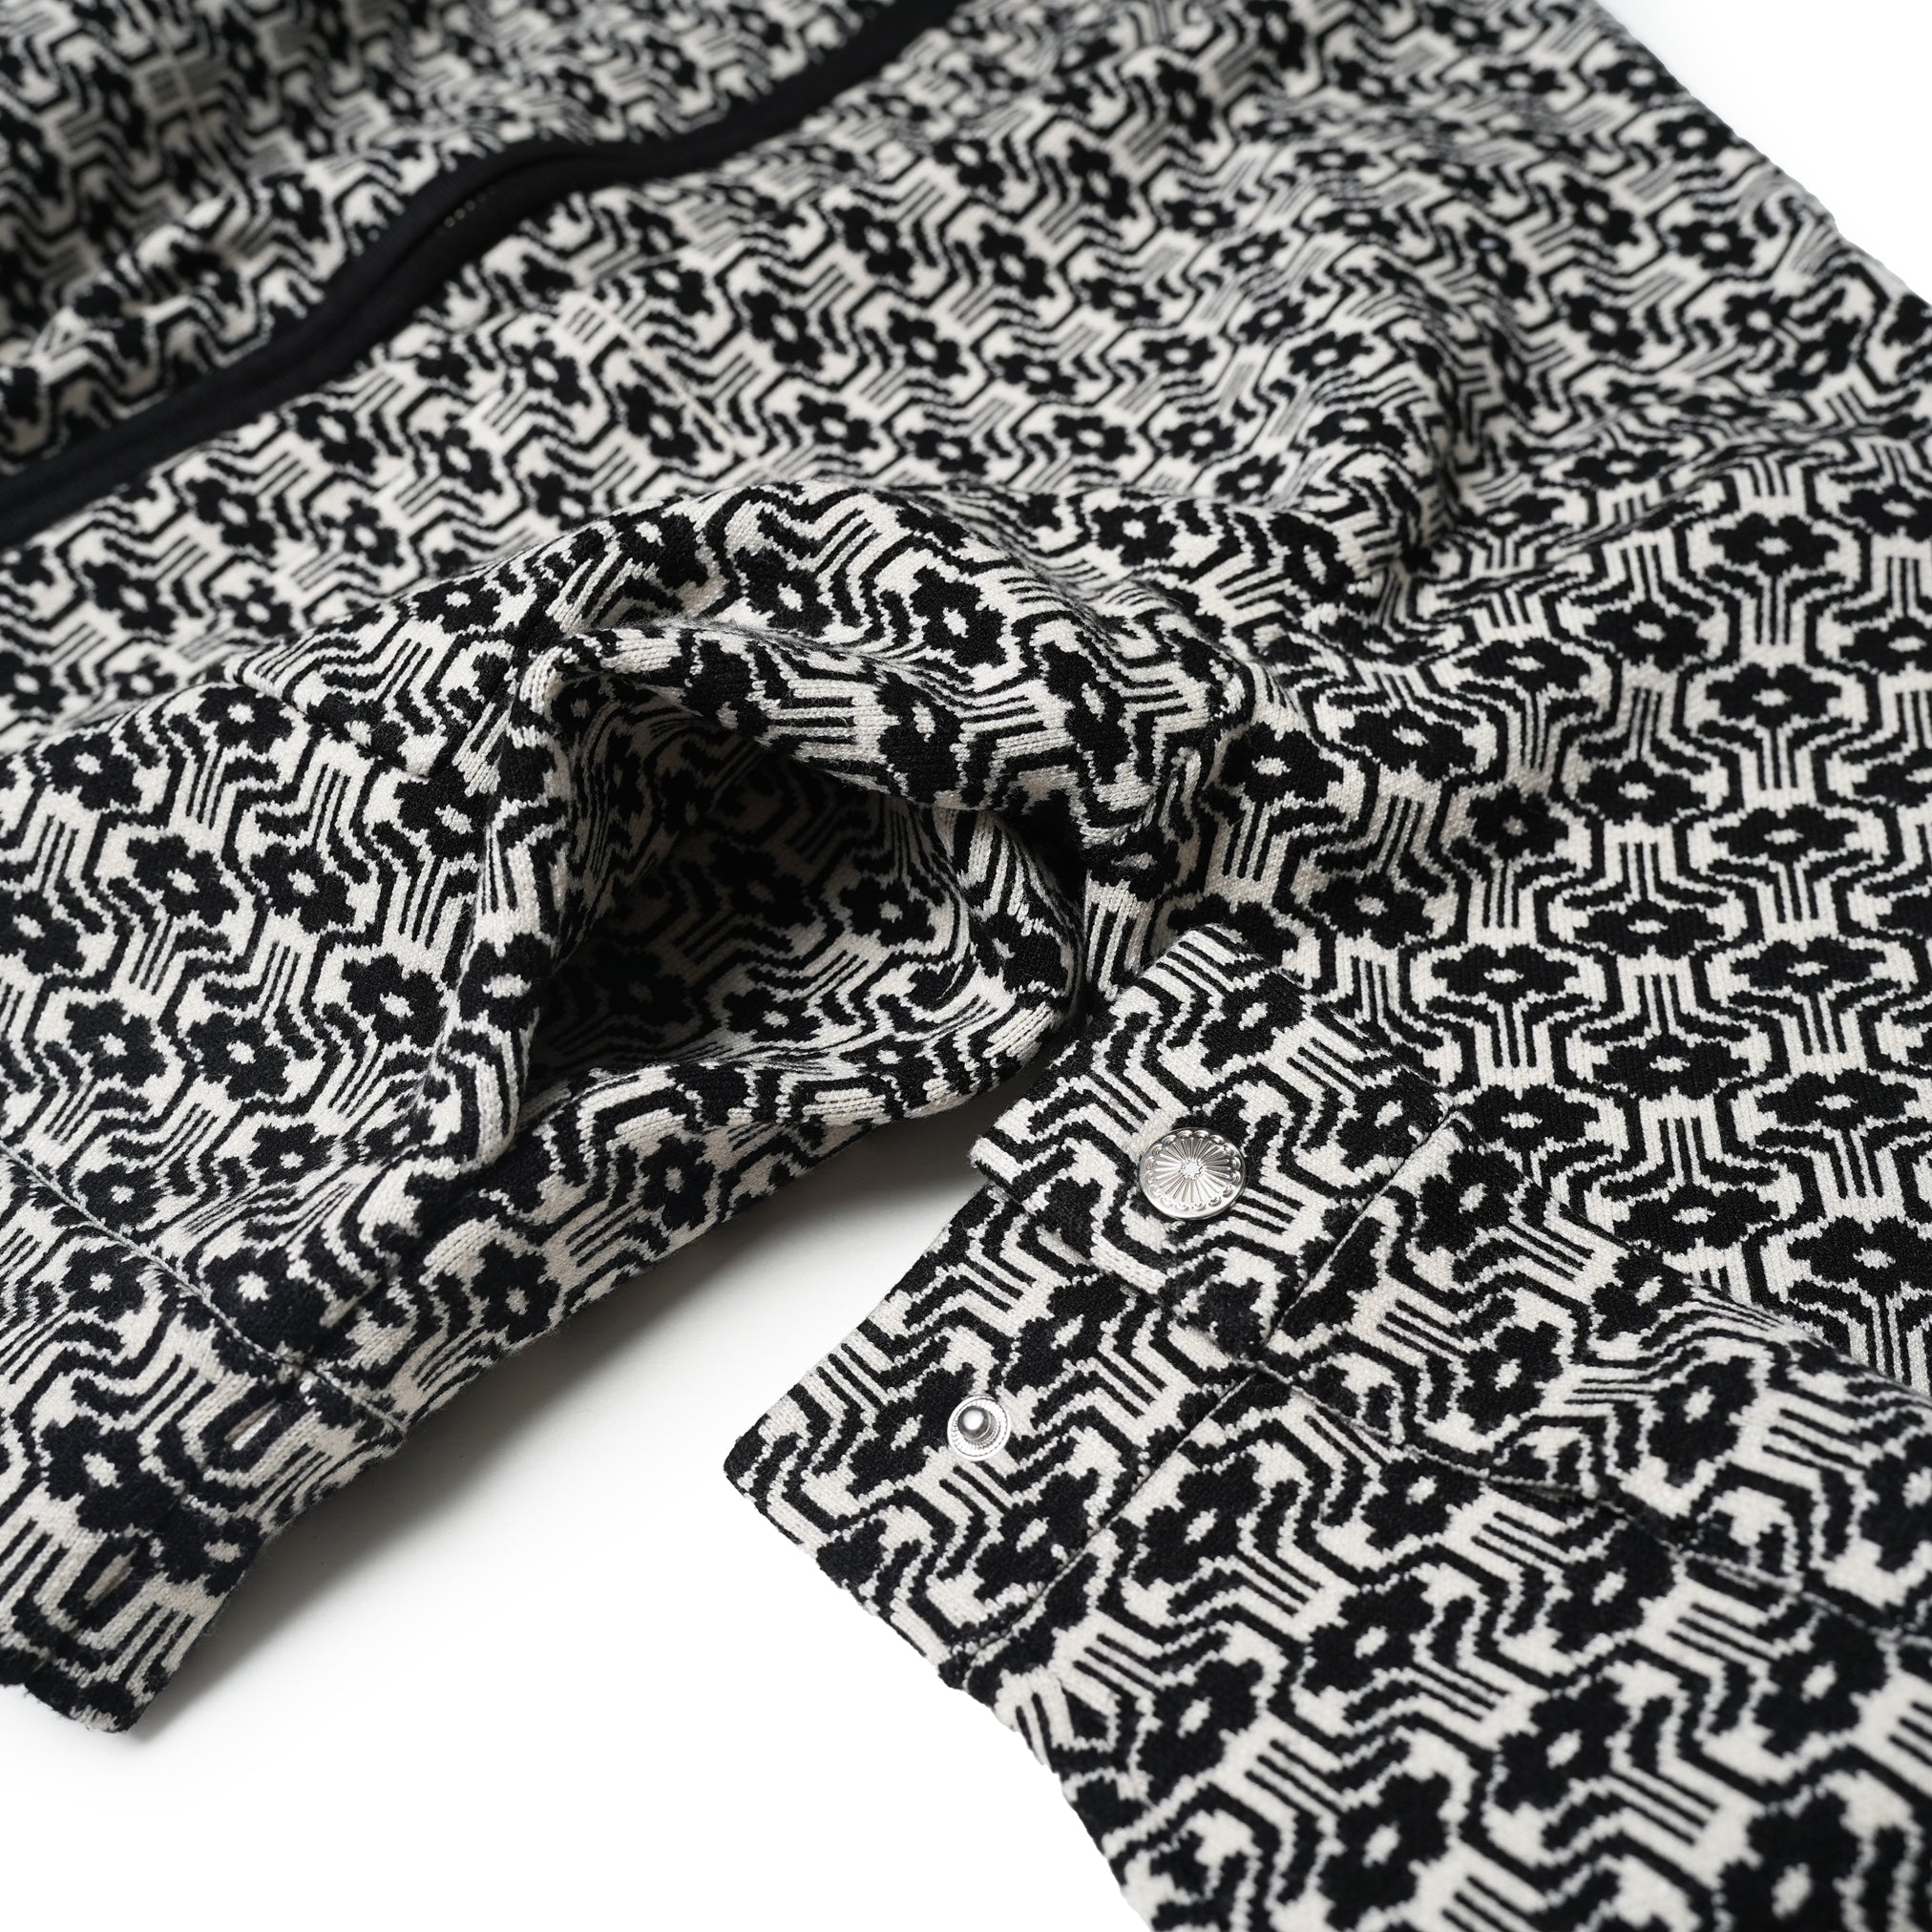 Name:Jacquard Knit Drivers Jacket | Color:Geometry | Size:Short【AMBERGLEAM_アンバーグリーム】| No:1145131114